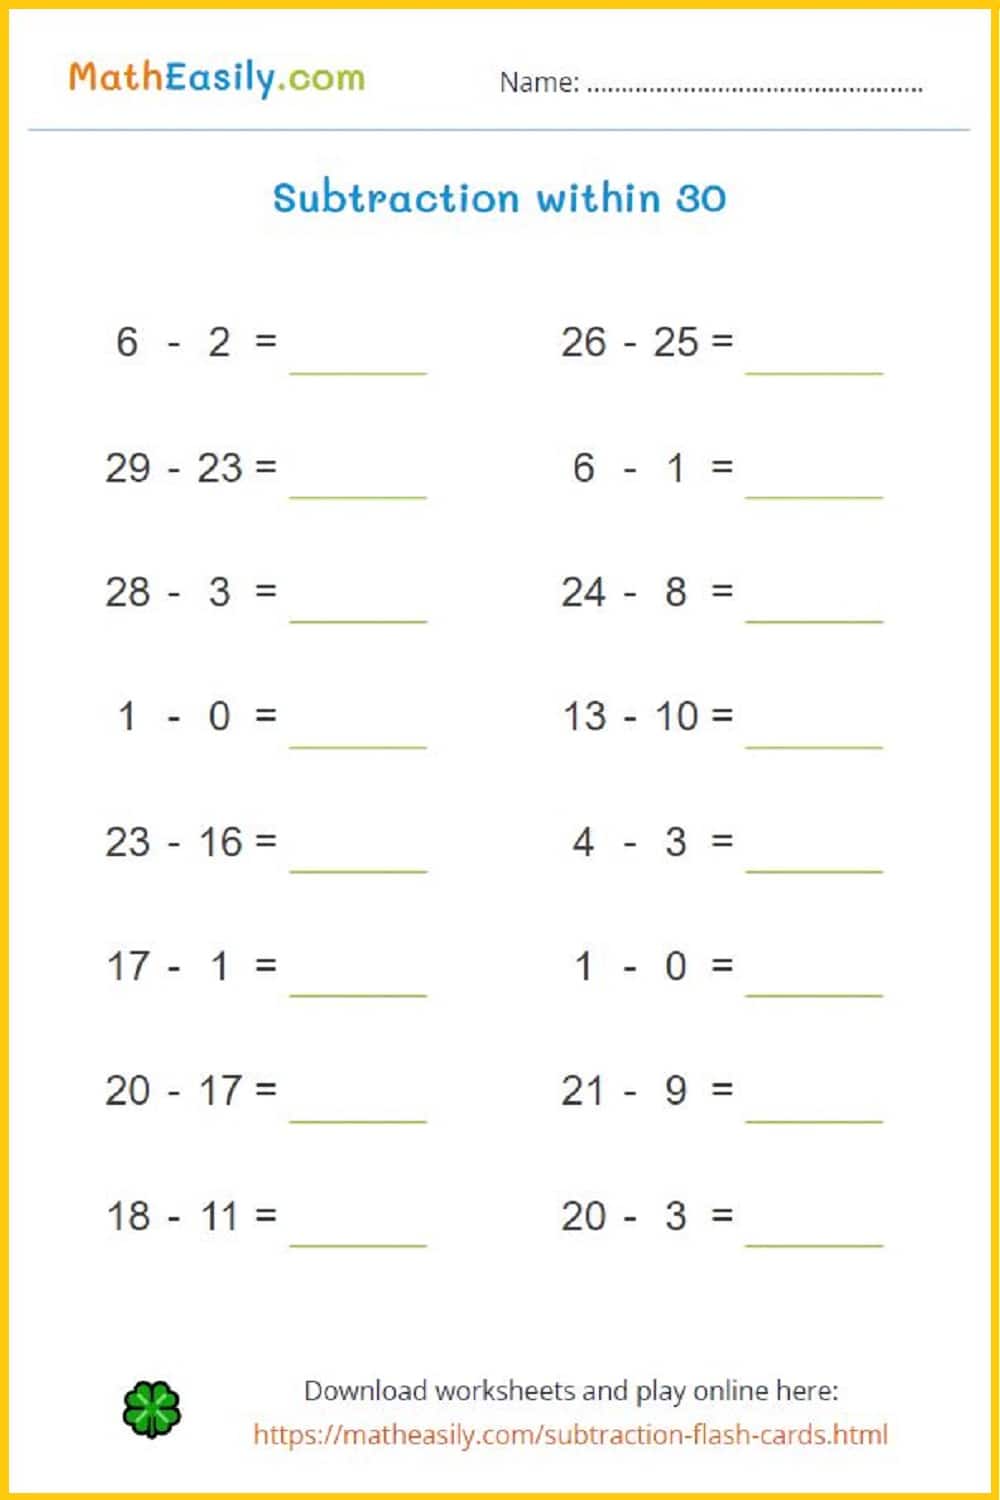 Free subtraction worksheets PDF free download.